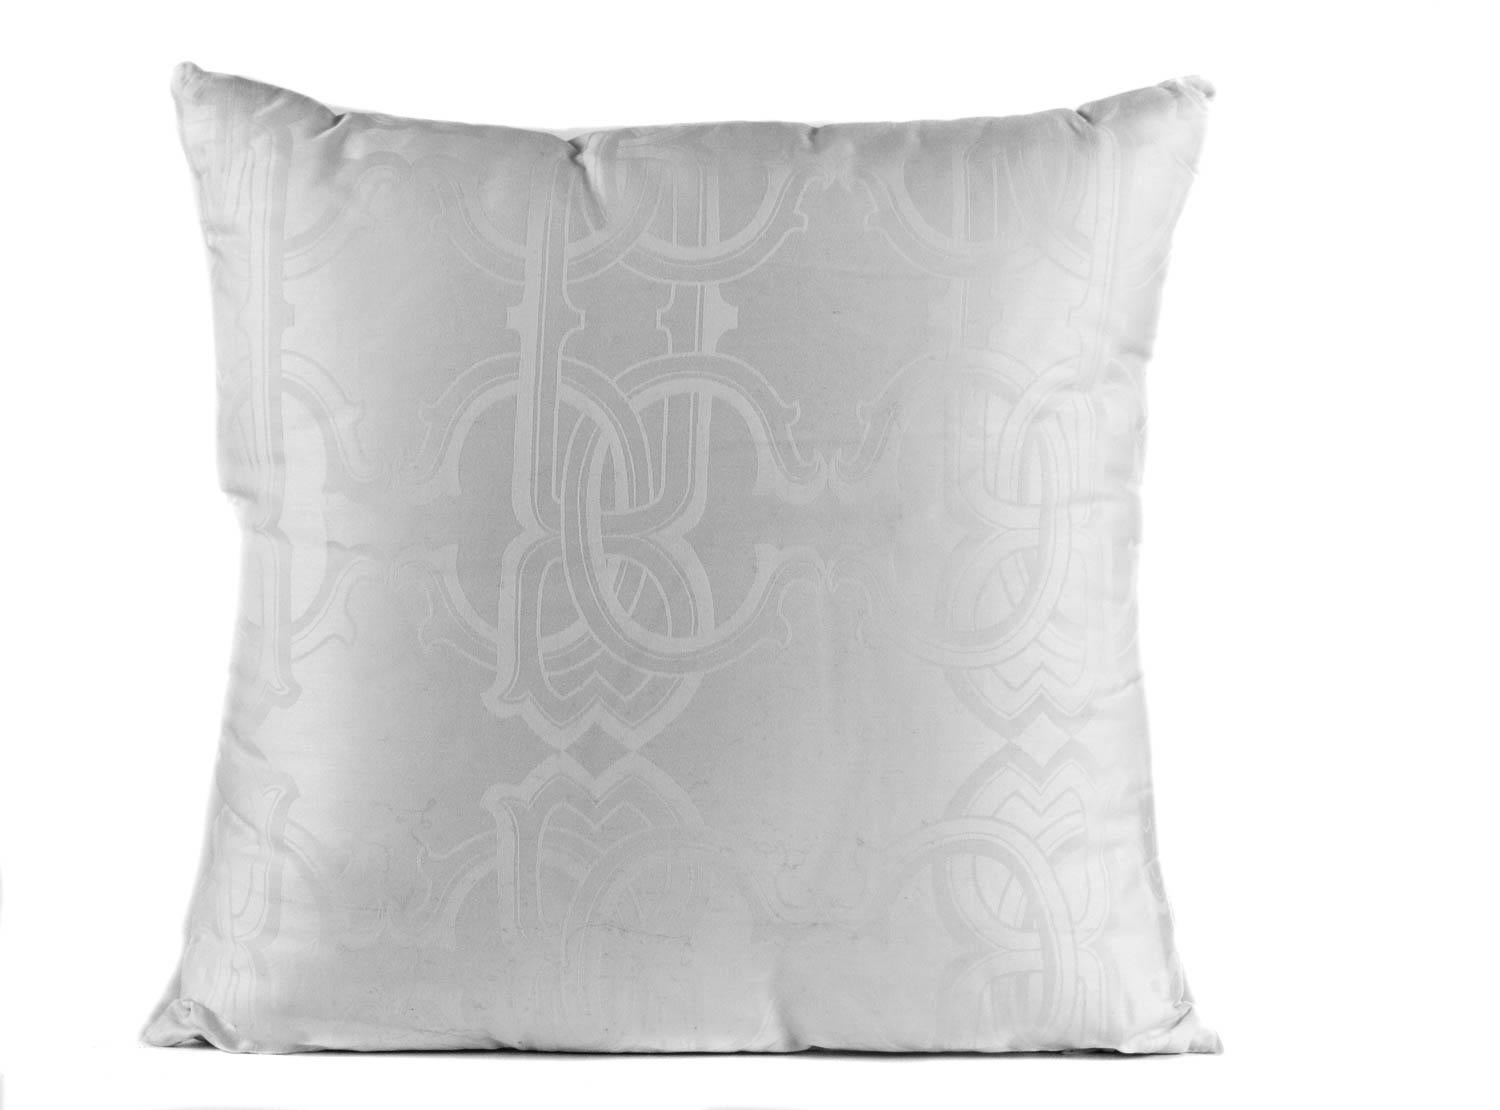 Elegance and chic style are displayed beautifully throughout the Roberto Cavalli Home collection. Made of soft cotton sateen, this cushion features the Roberto Cavalli logo on a solid white background. An ideal luxury gift for the fashion conscious,